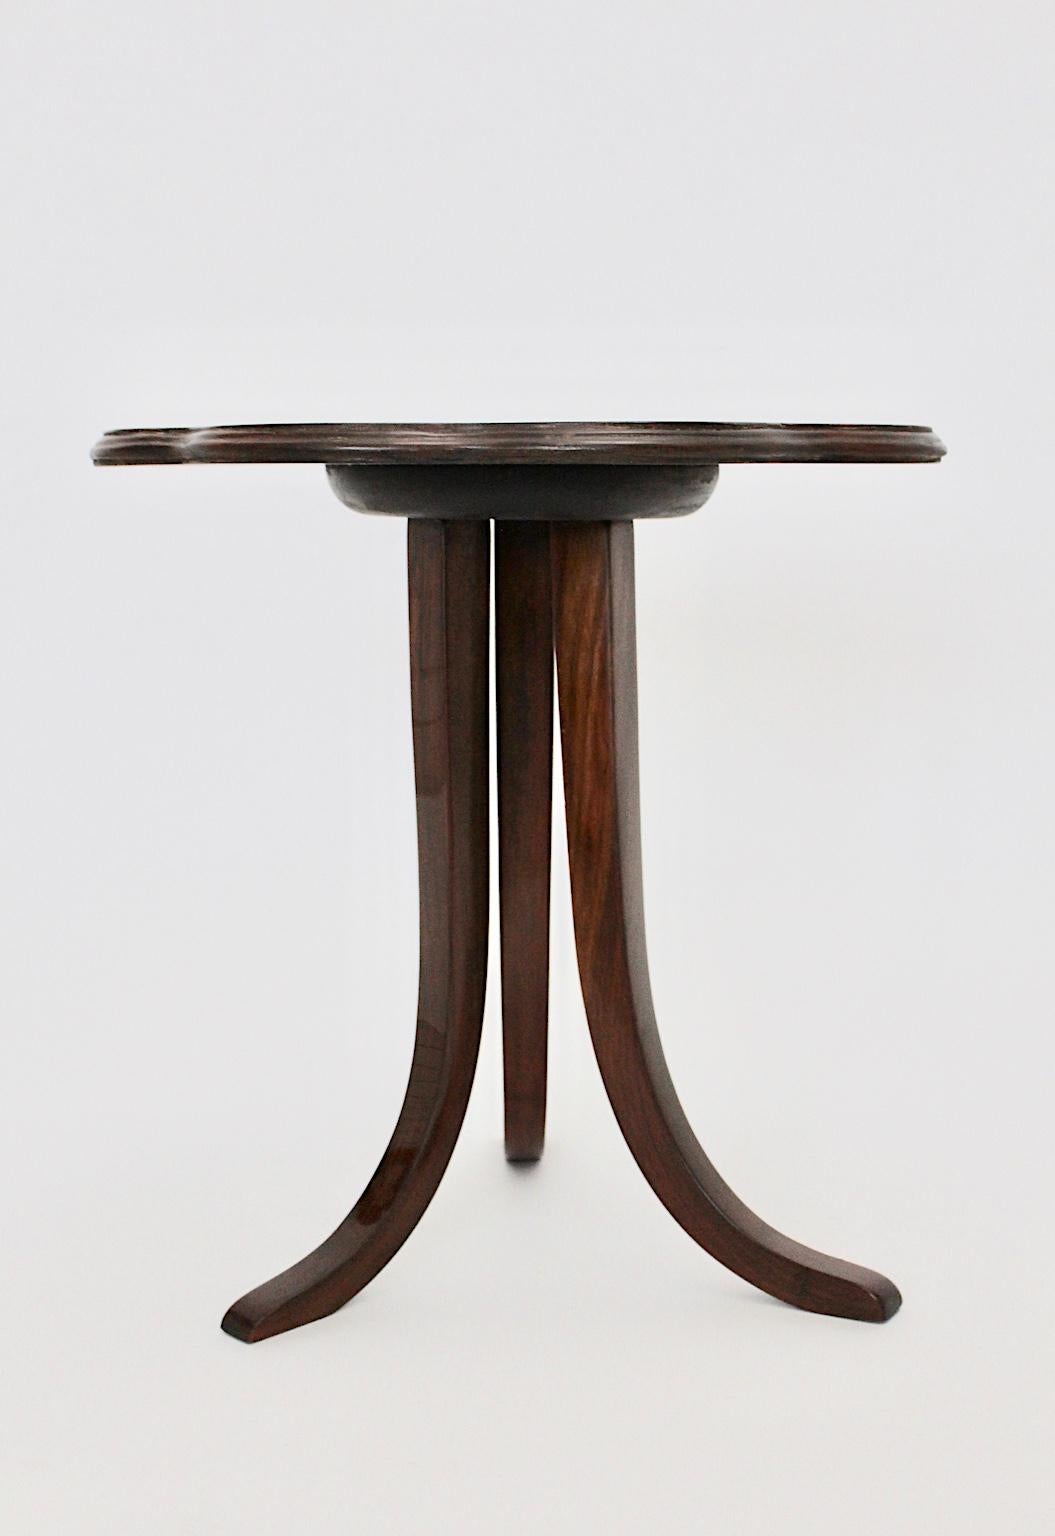 Walnut Art Deco Vintage Side Table or Coffee Table by Josef Frank, Vienna 4